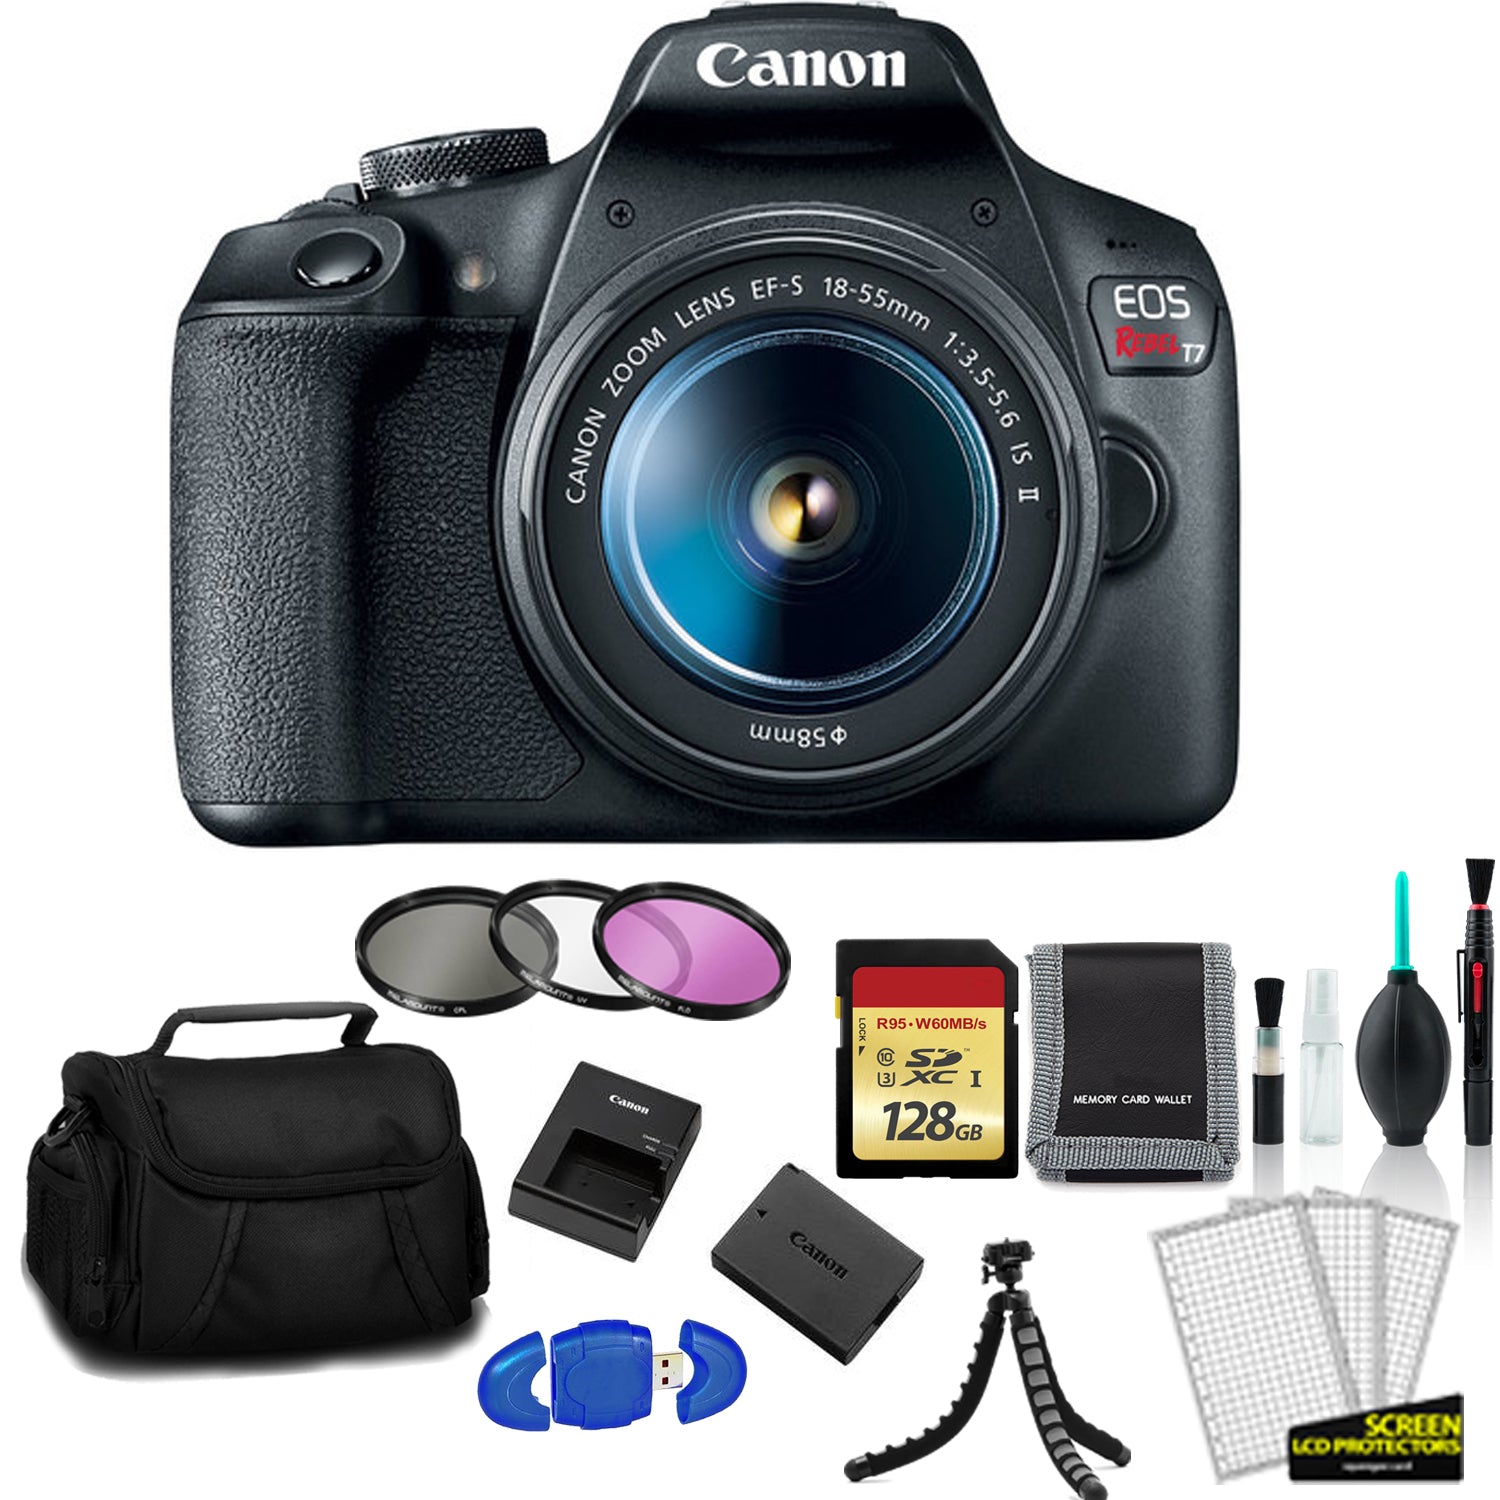 Canon EOS Rebel T7 EF-S 18-55mm IS II Kit with 128GB Memory Card + Filter Kit+ More - International Model